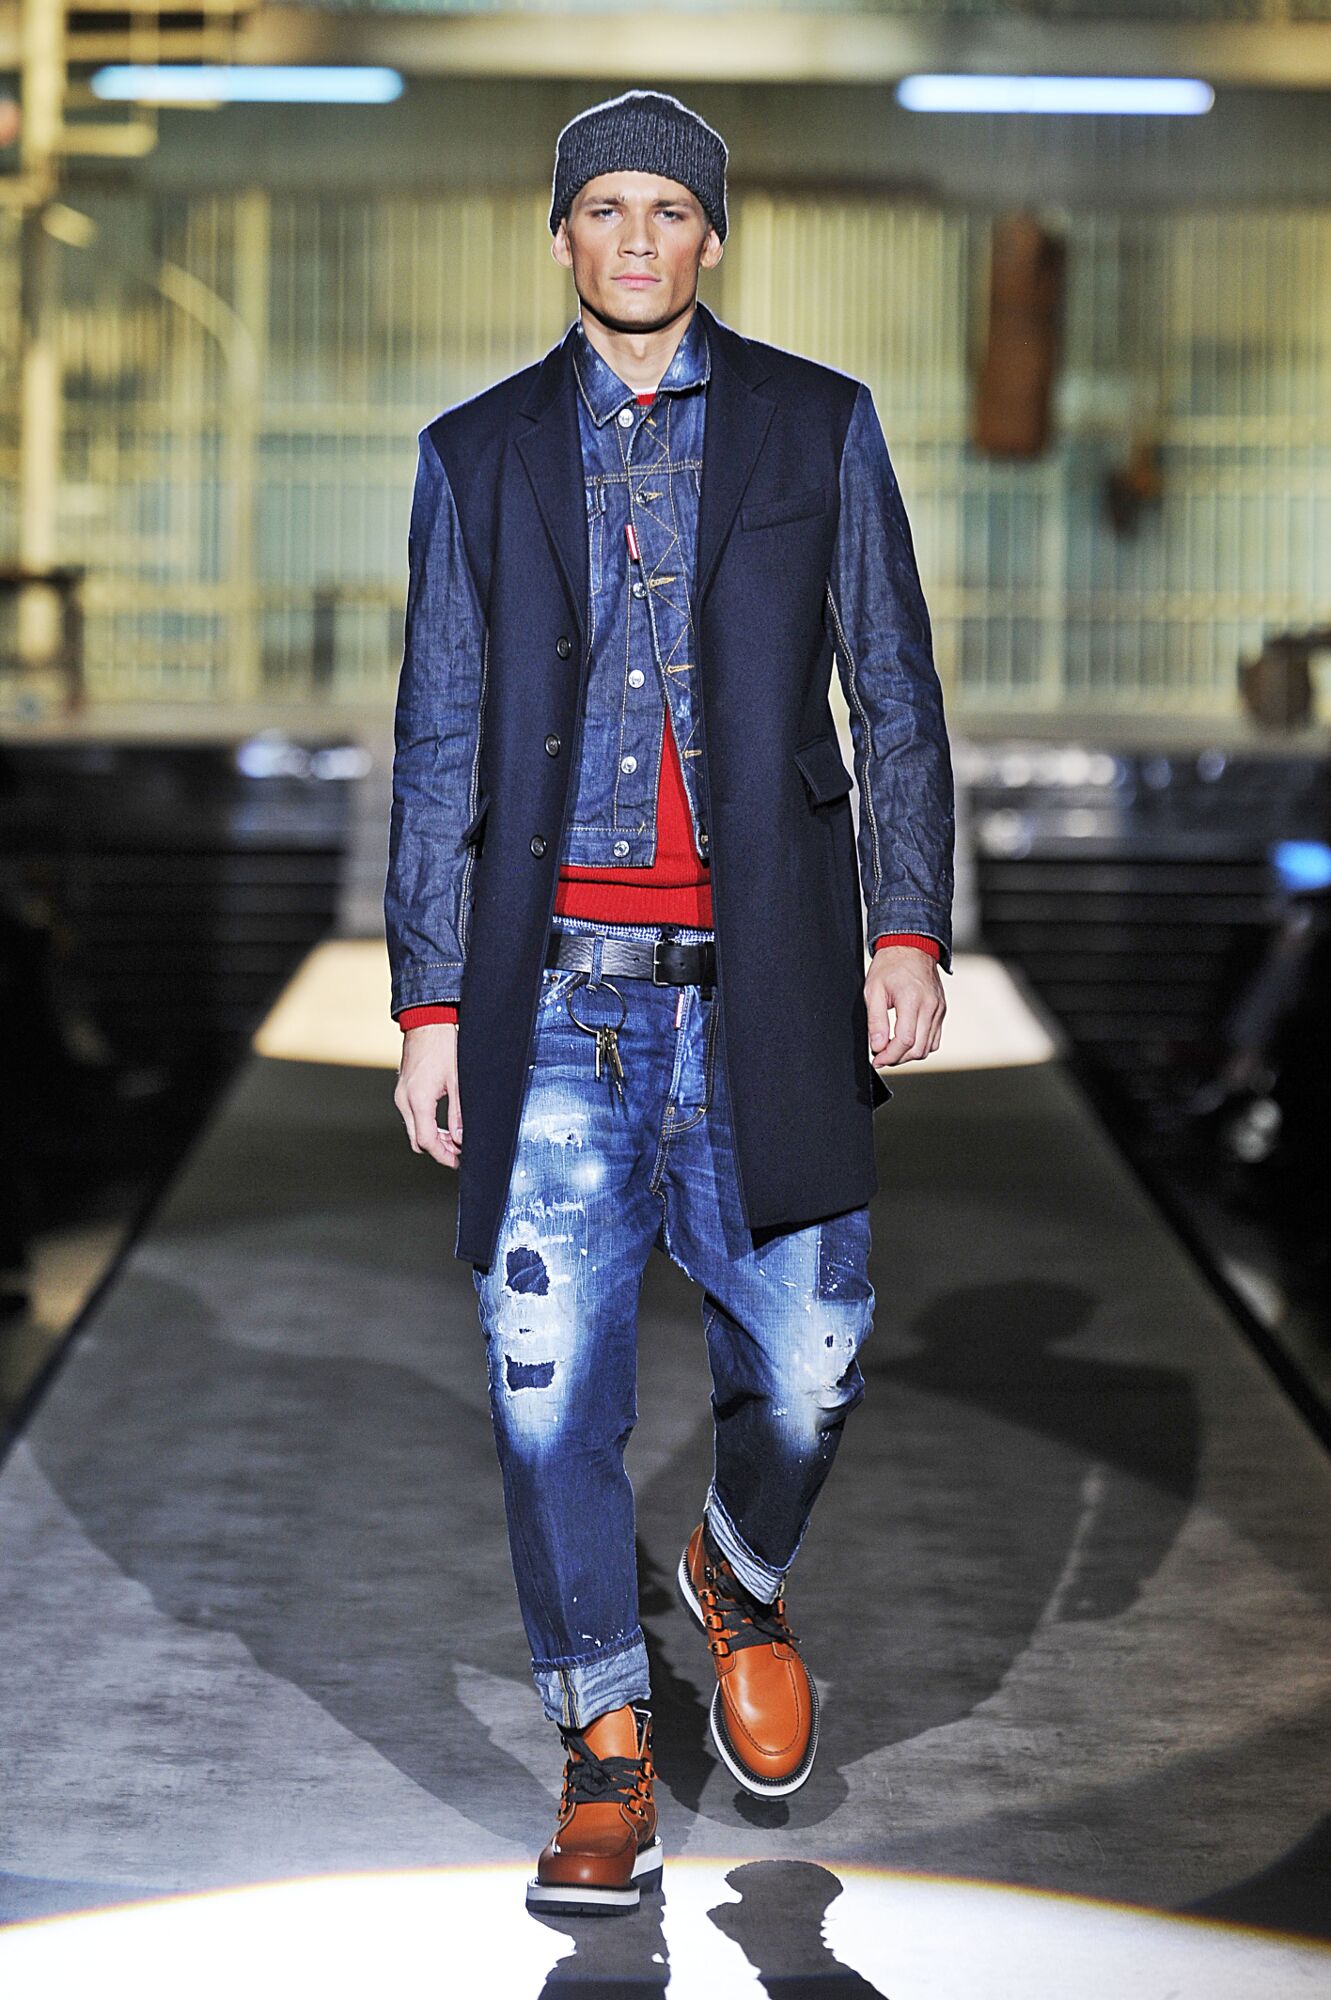 jeans style dsquared2